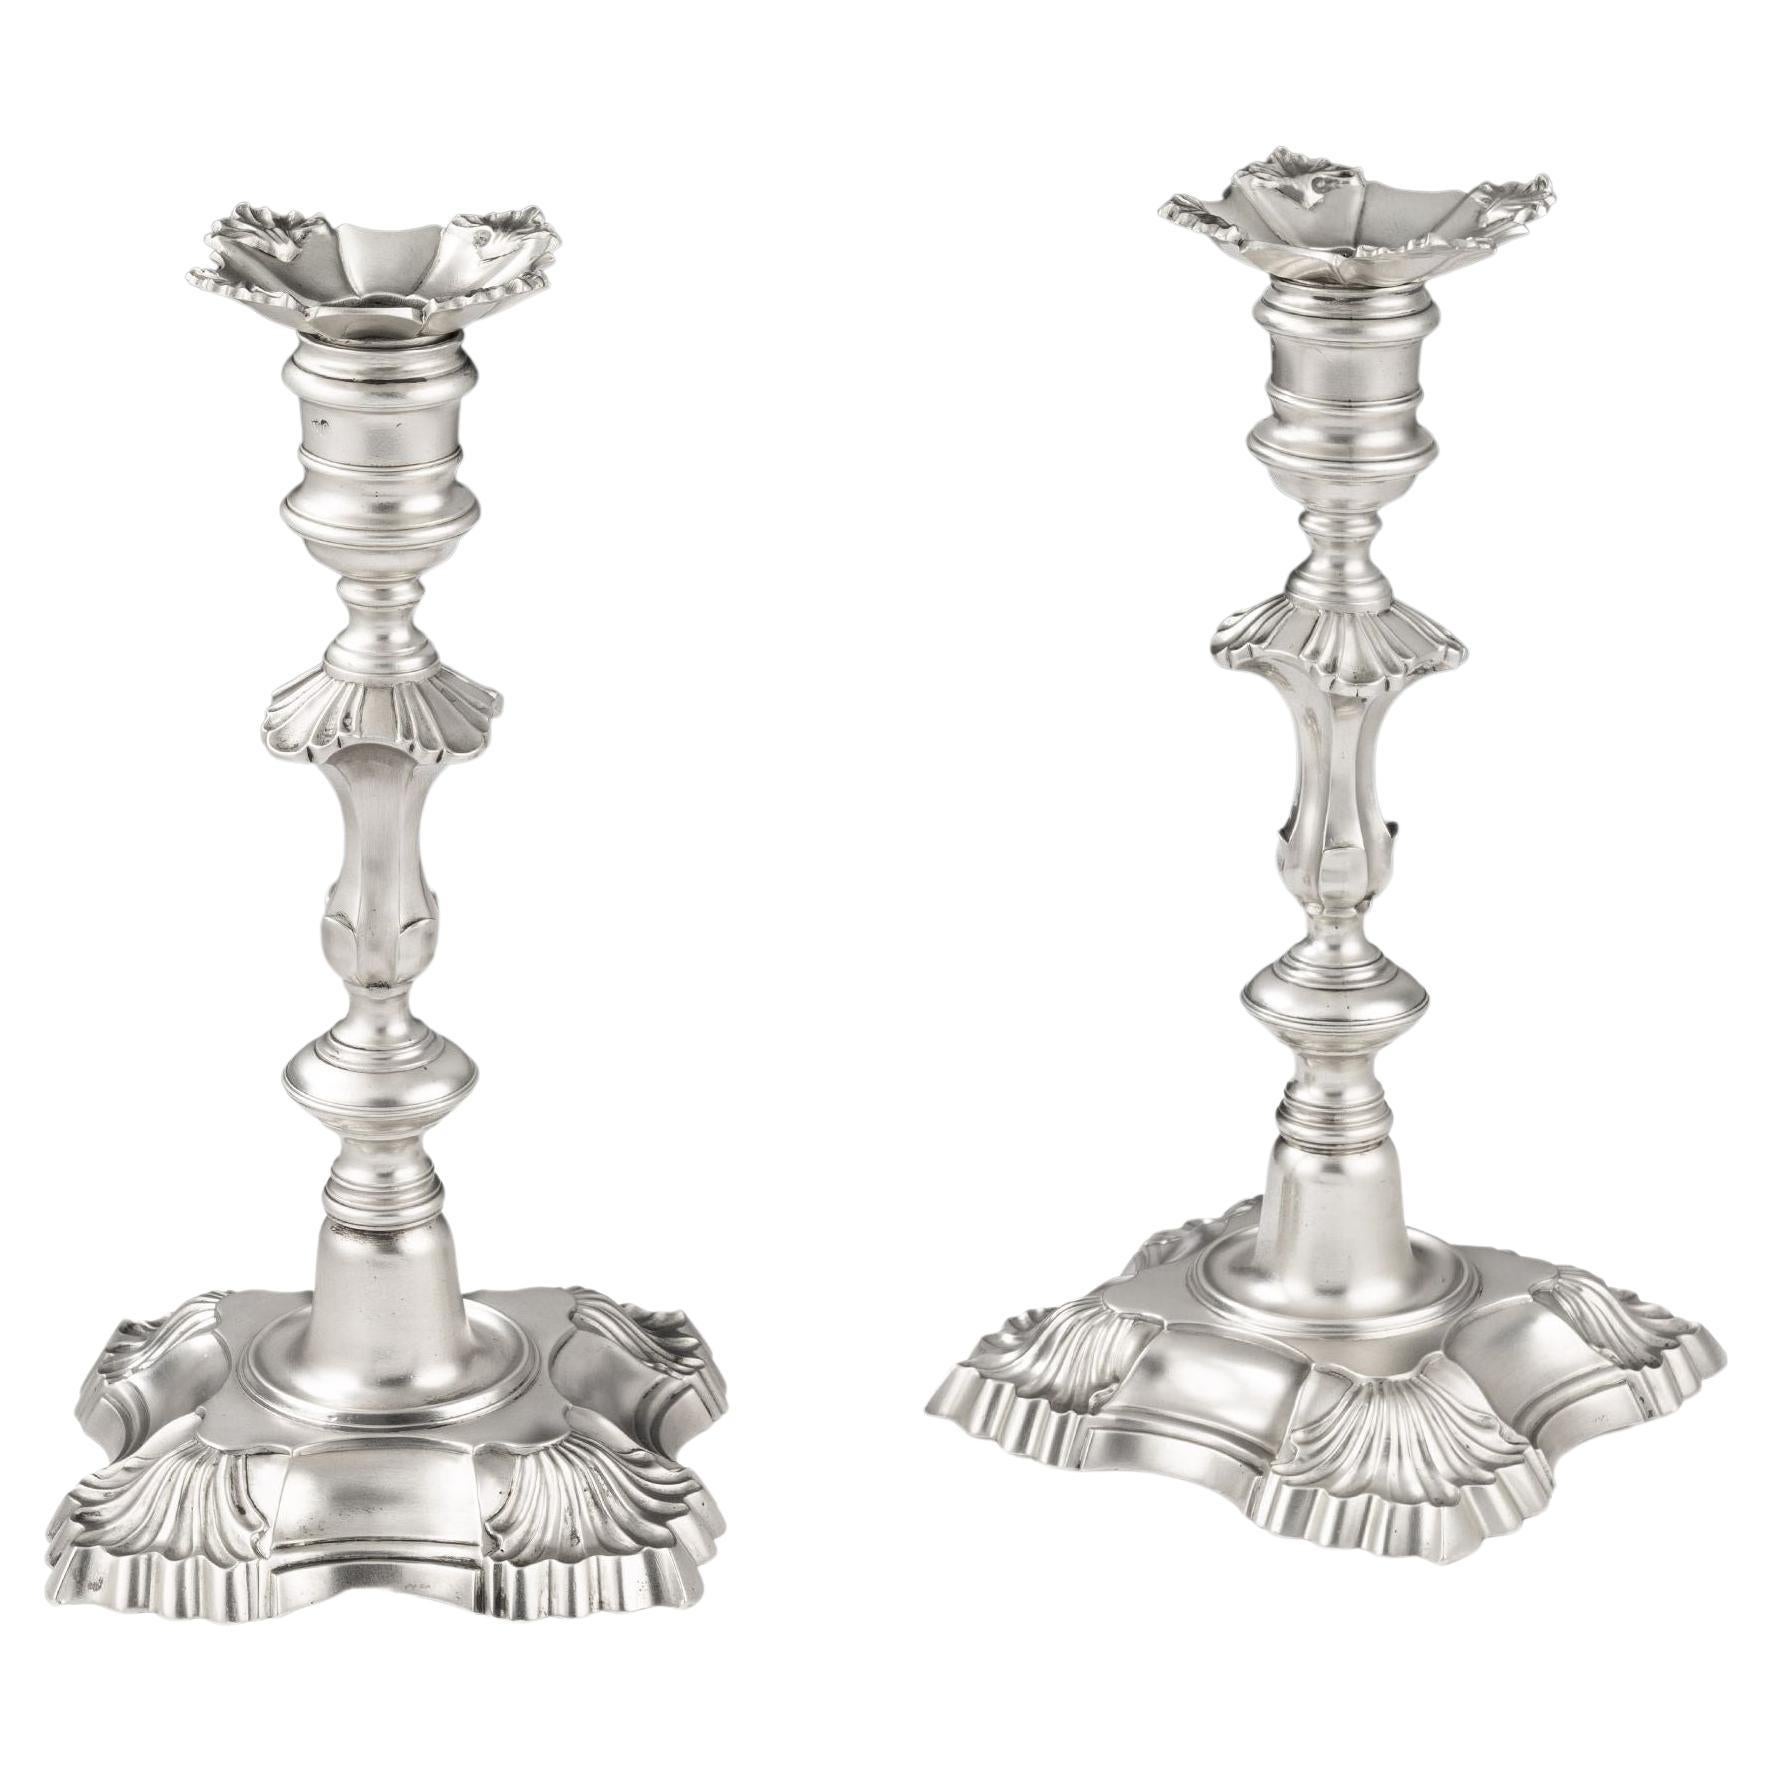 Pair of George II Cast Candlesticks Made in London in 1748 by William Gould For Sale